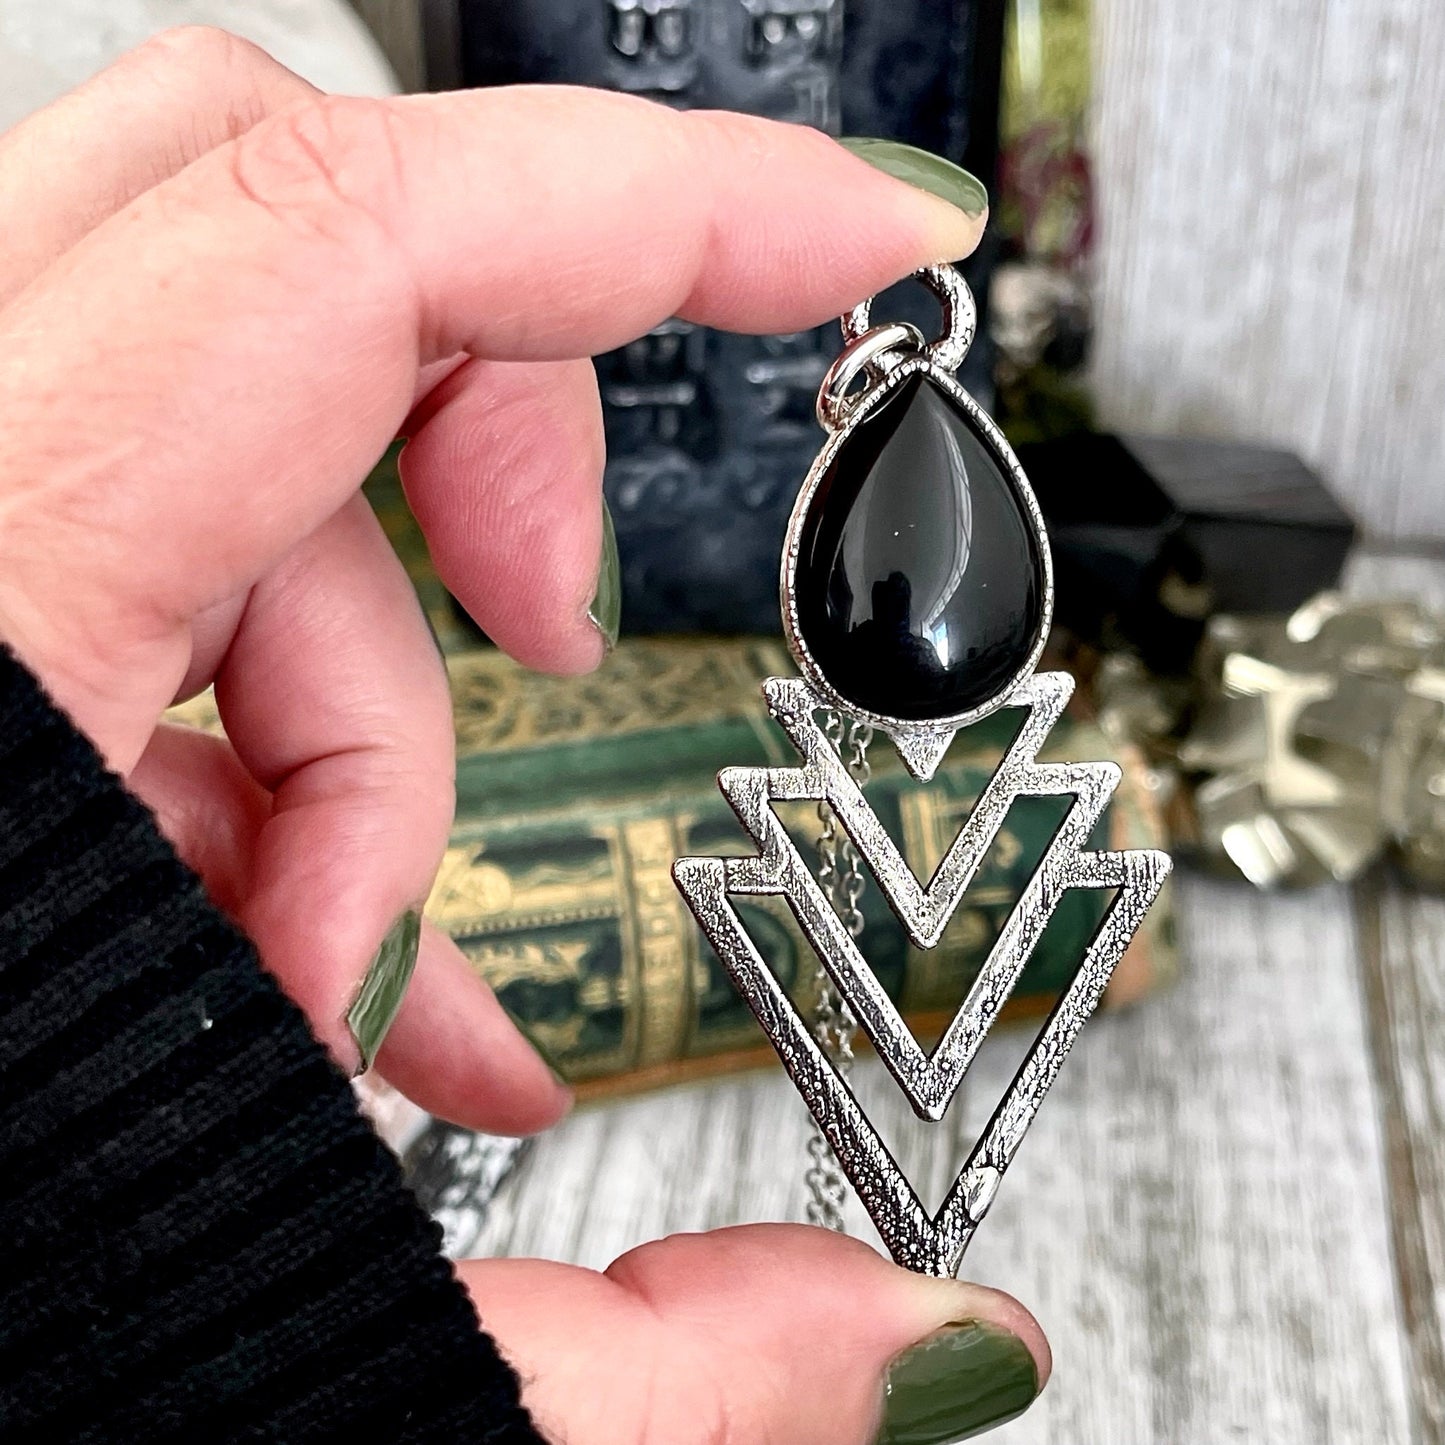 Moss & Moon Collection -Black Onyx Statement Necklace set in Fine Silver / / Alternative Witchy Pendent Boho Electroformed Jewelry